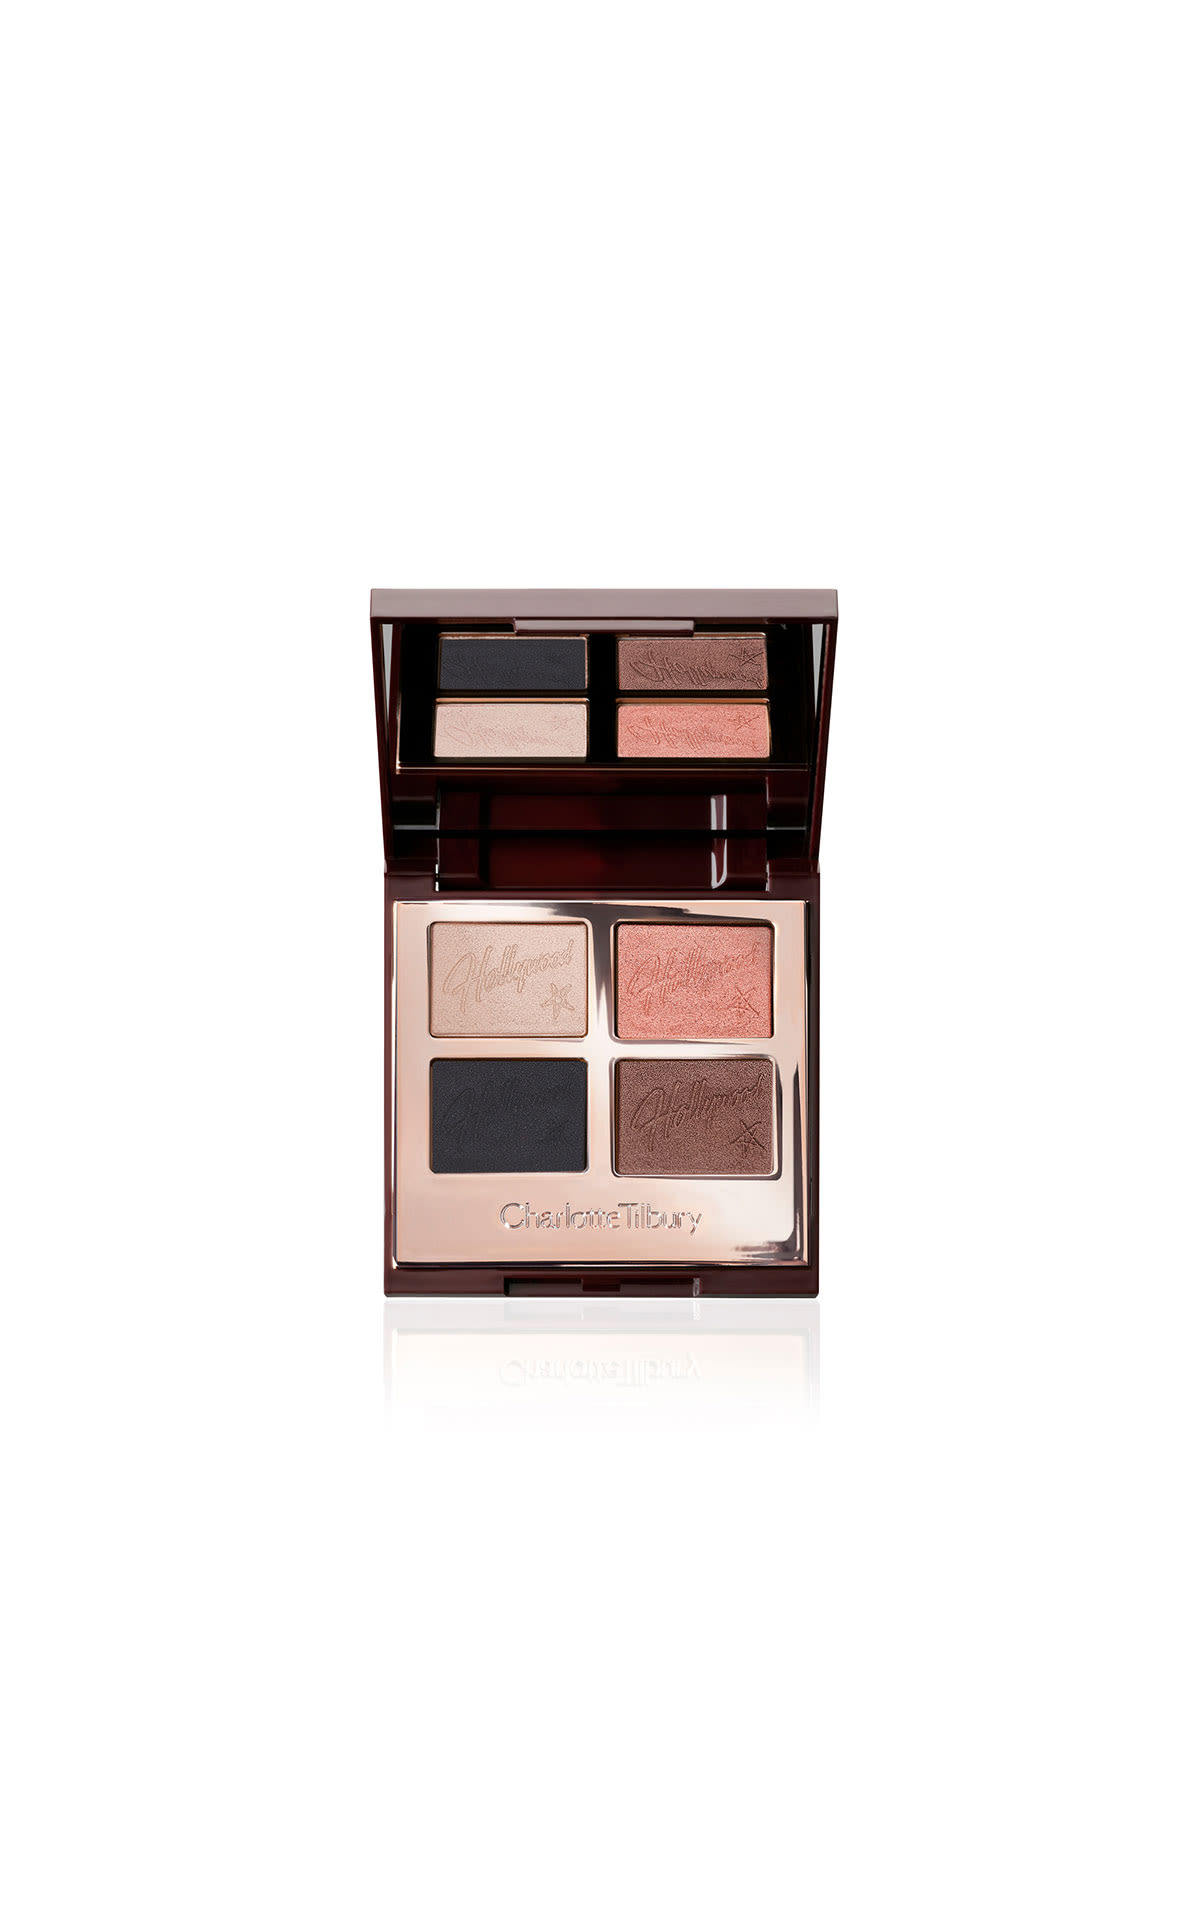 Charlotte Tilbury Luxury palette - Hollywood flawless eye filter from Bicester Village